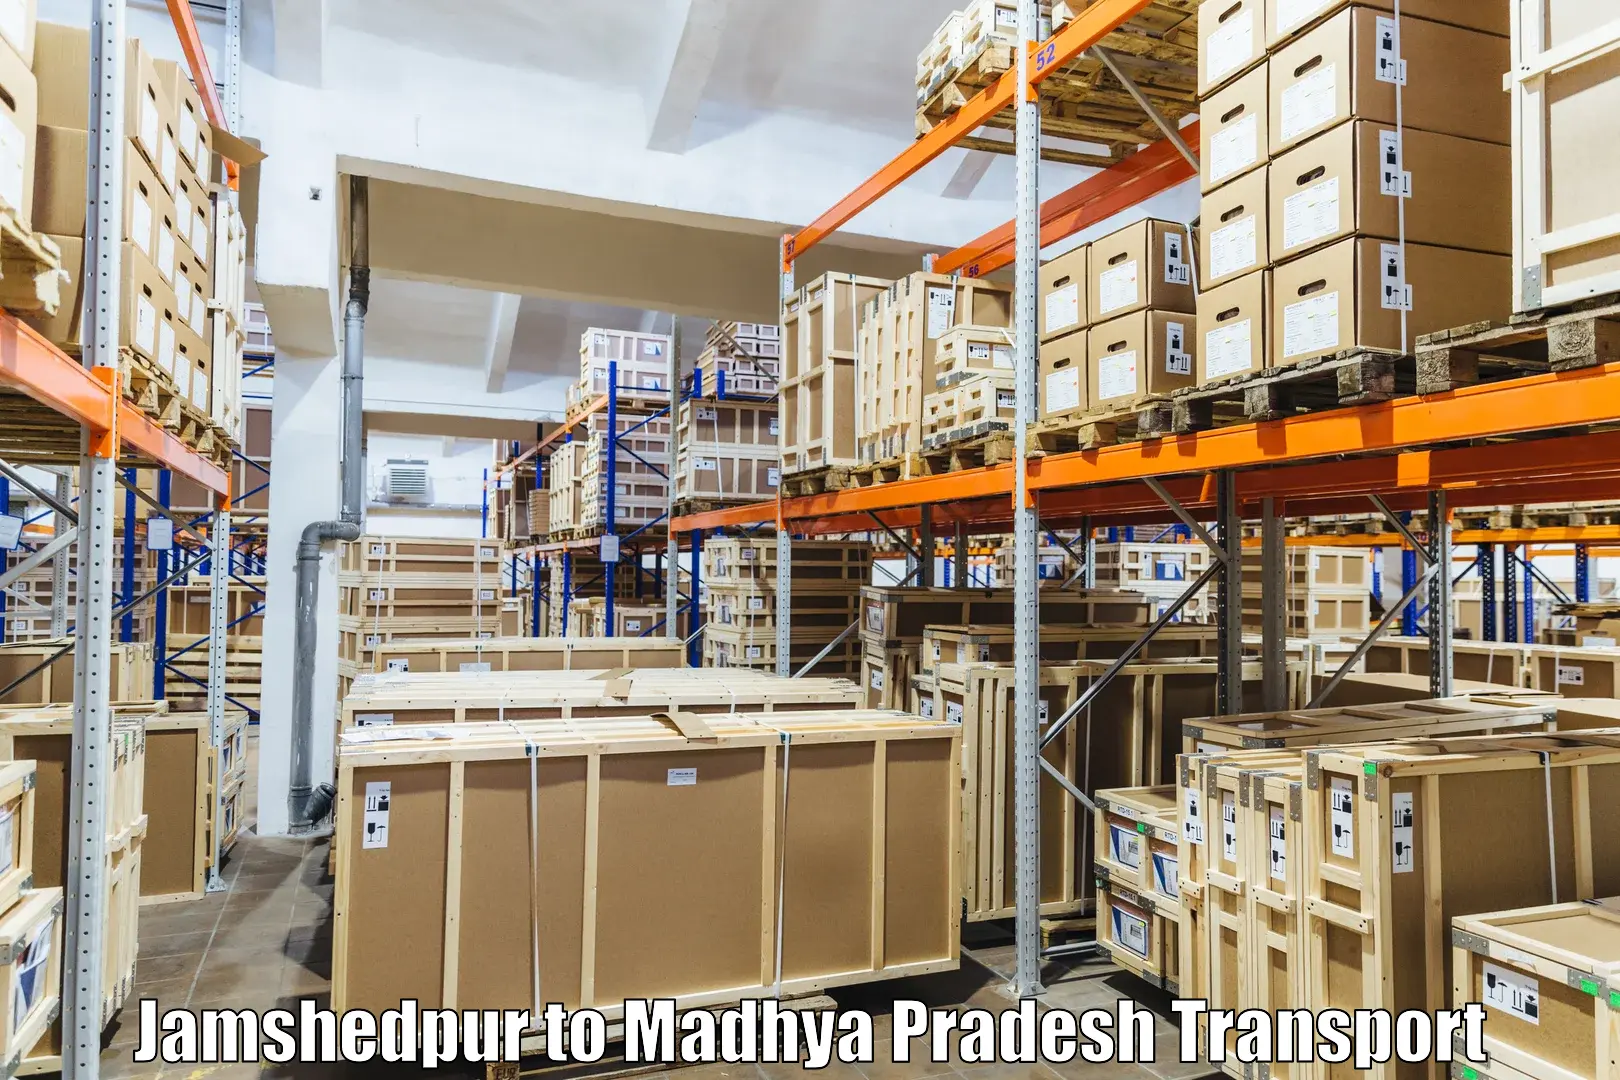 Express transport services Jamshedpur to Nainpur